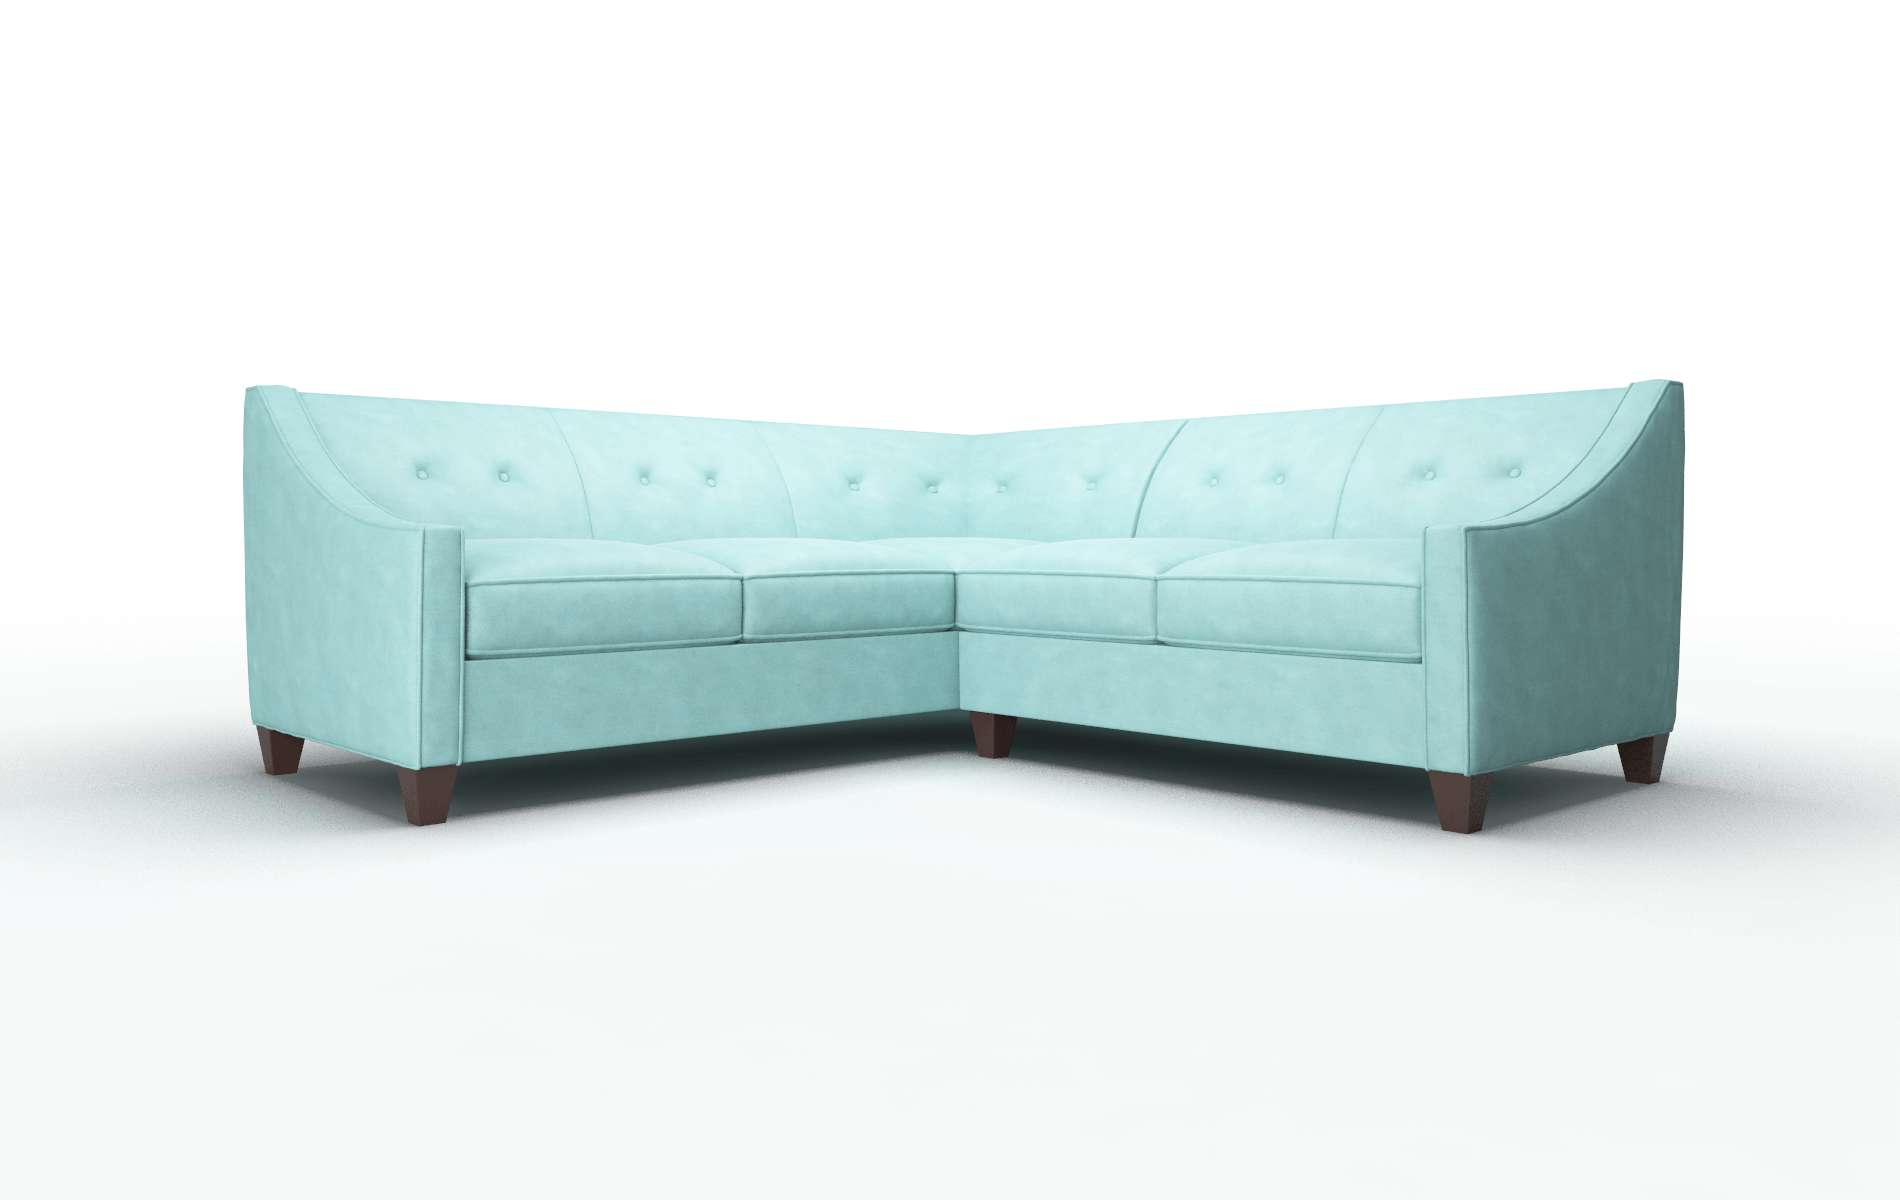 Berlin Curious Turquoise Sectional espresso legs 1